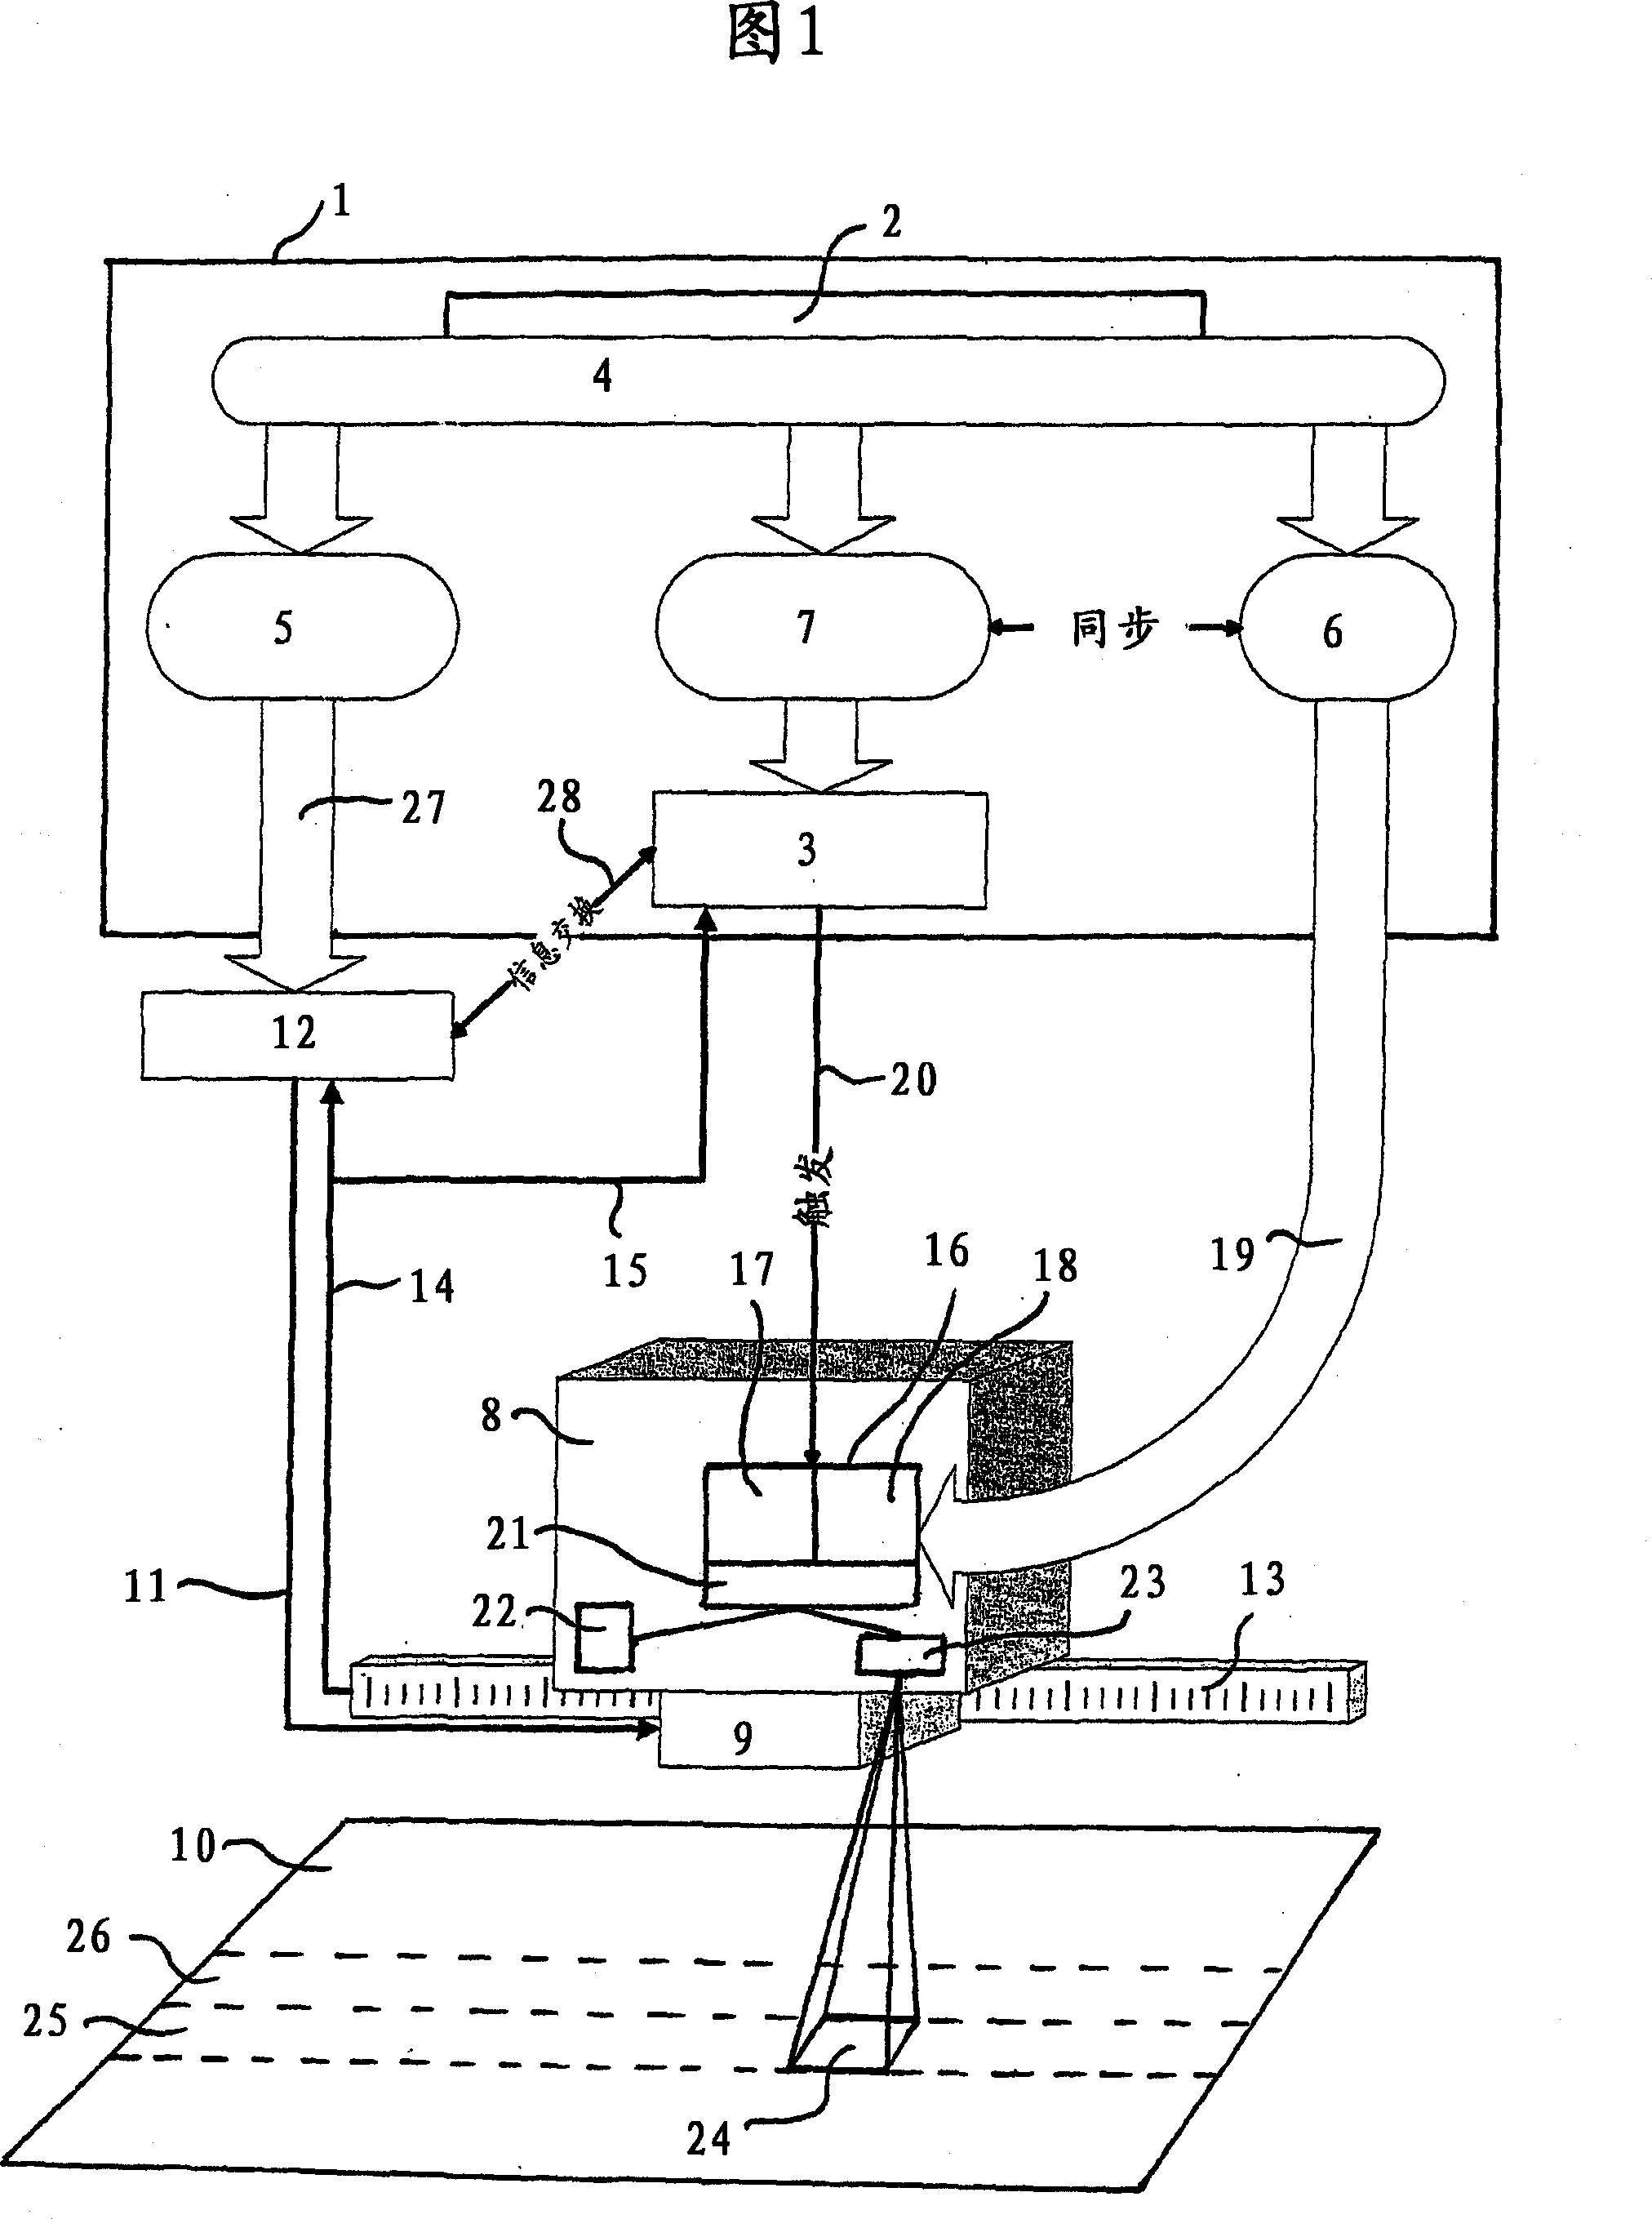 Device and method for digital exposure